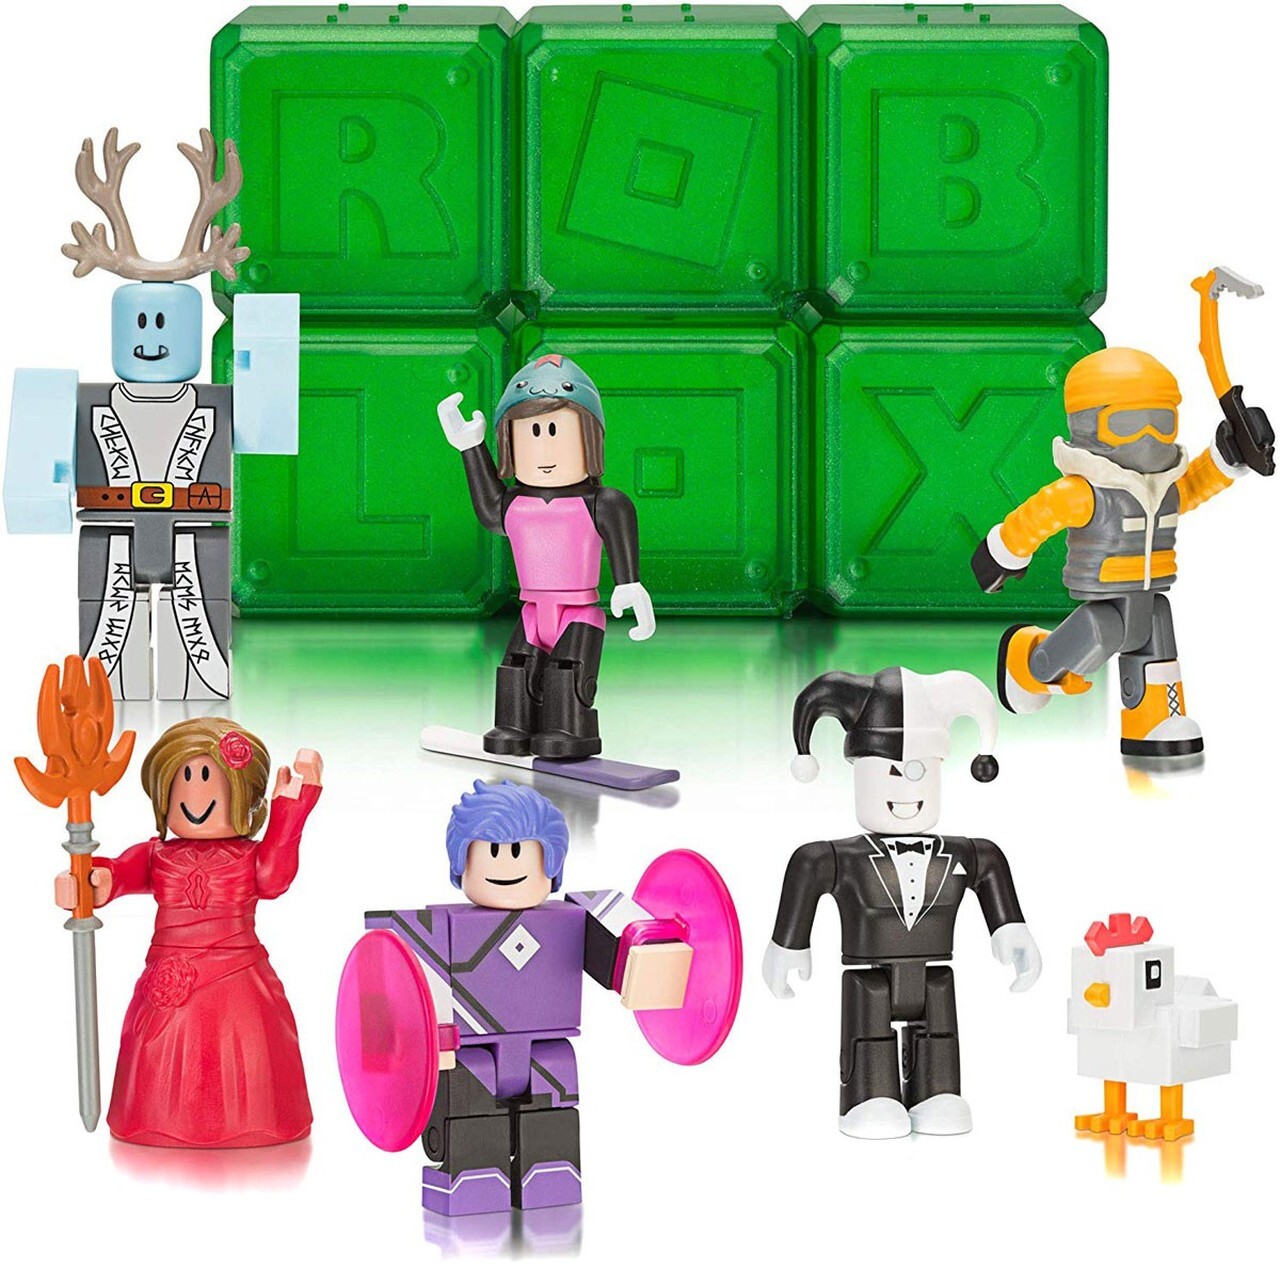 Roblox Toys Series 2 - roblox celebrity adopt me pet shop playset 40 pcs early in hand